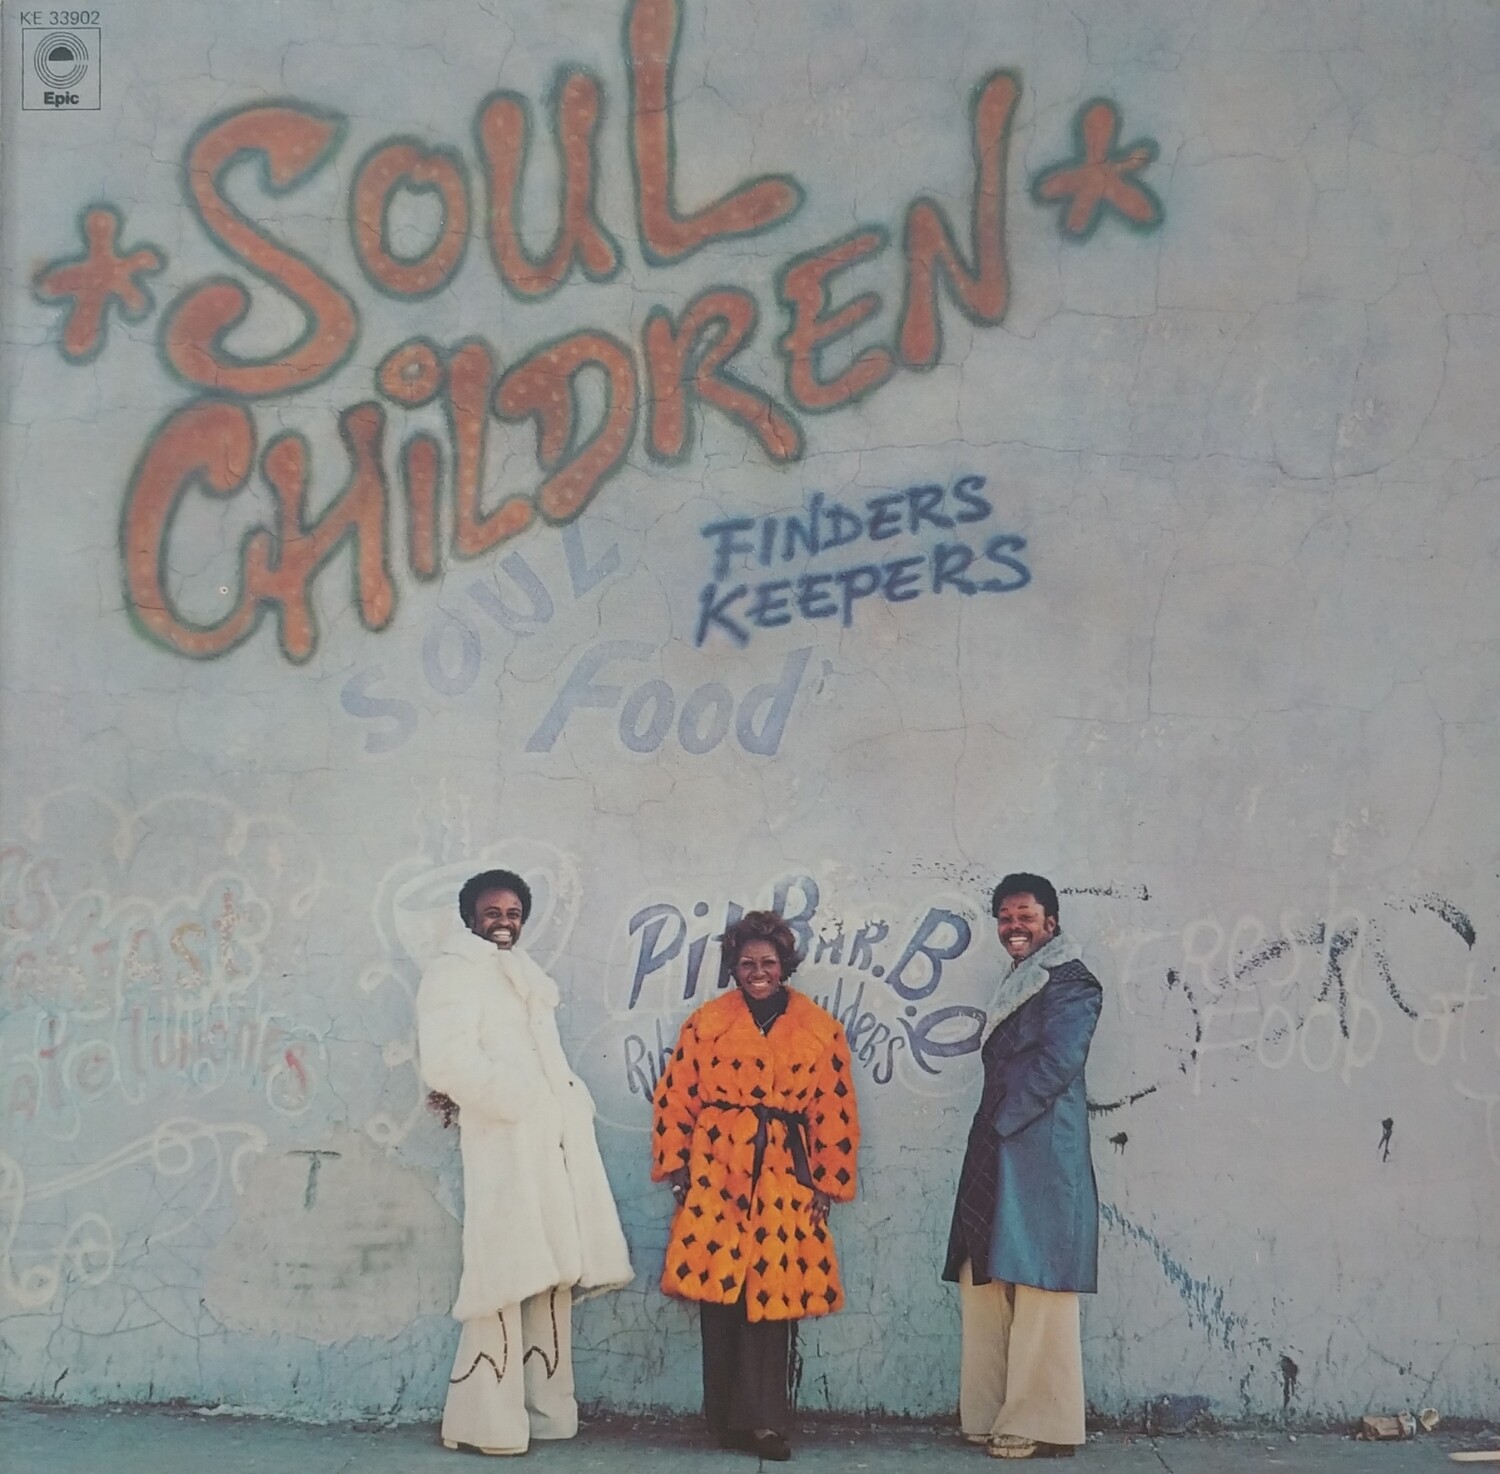 The Soul Children - Finders Keepers